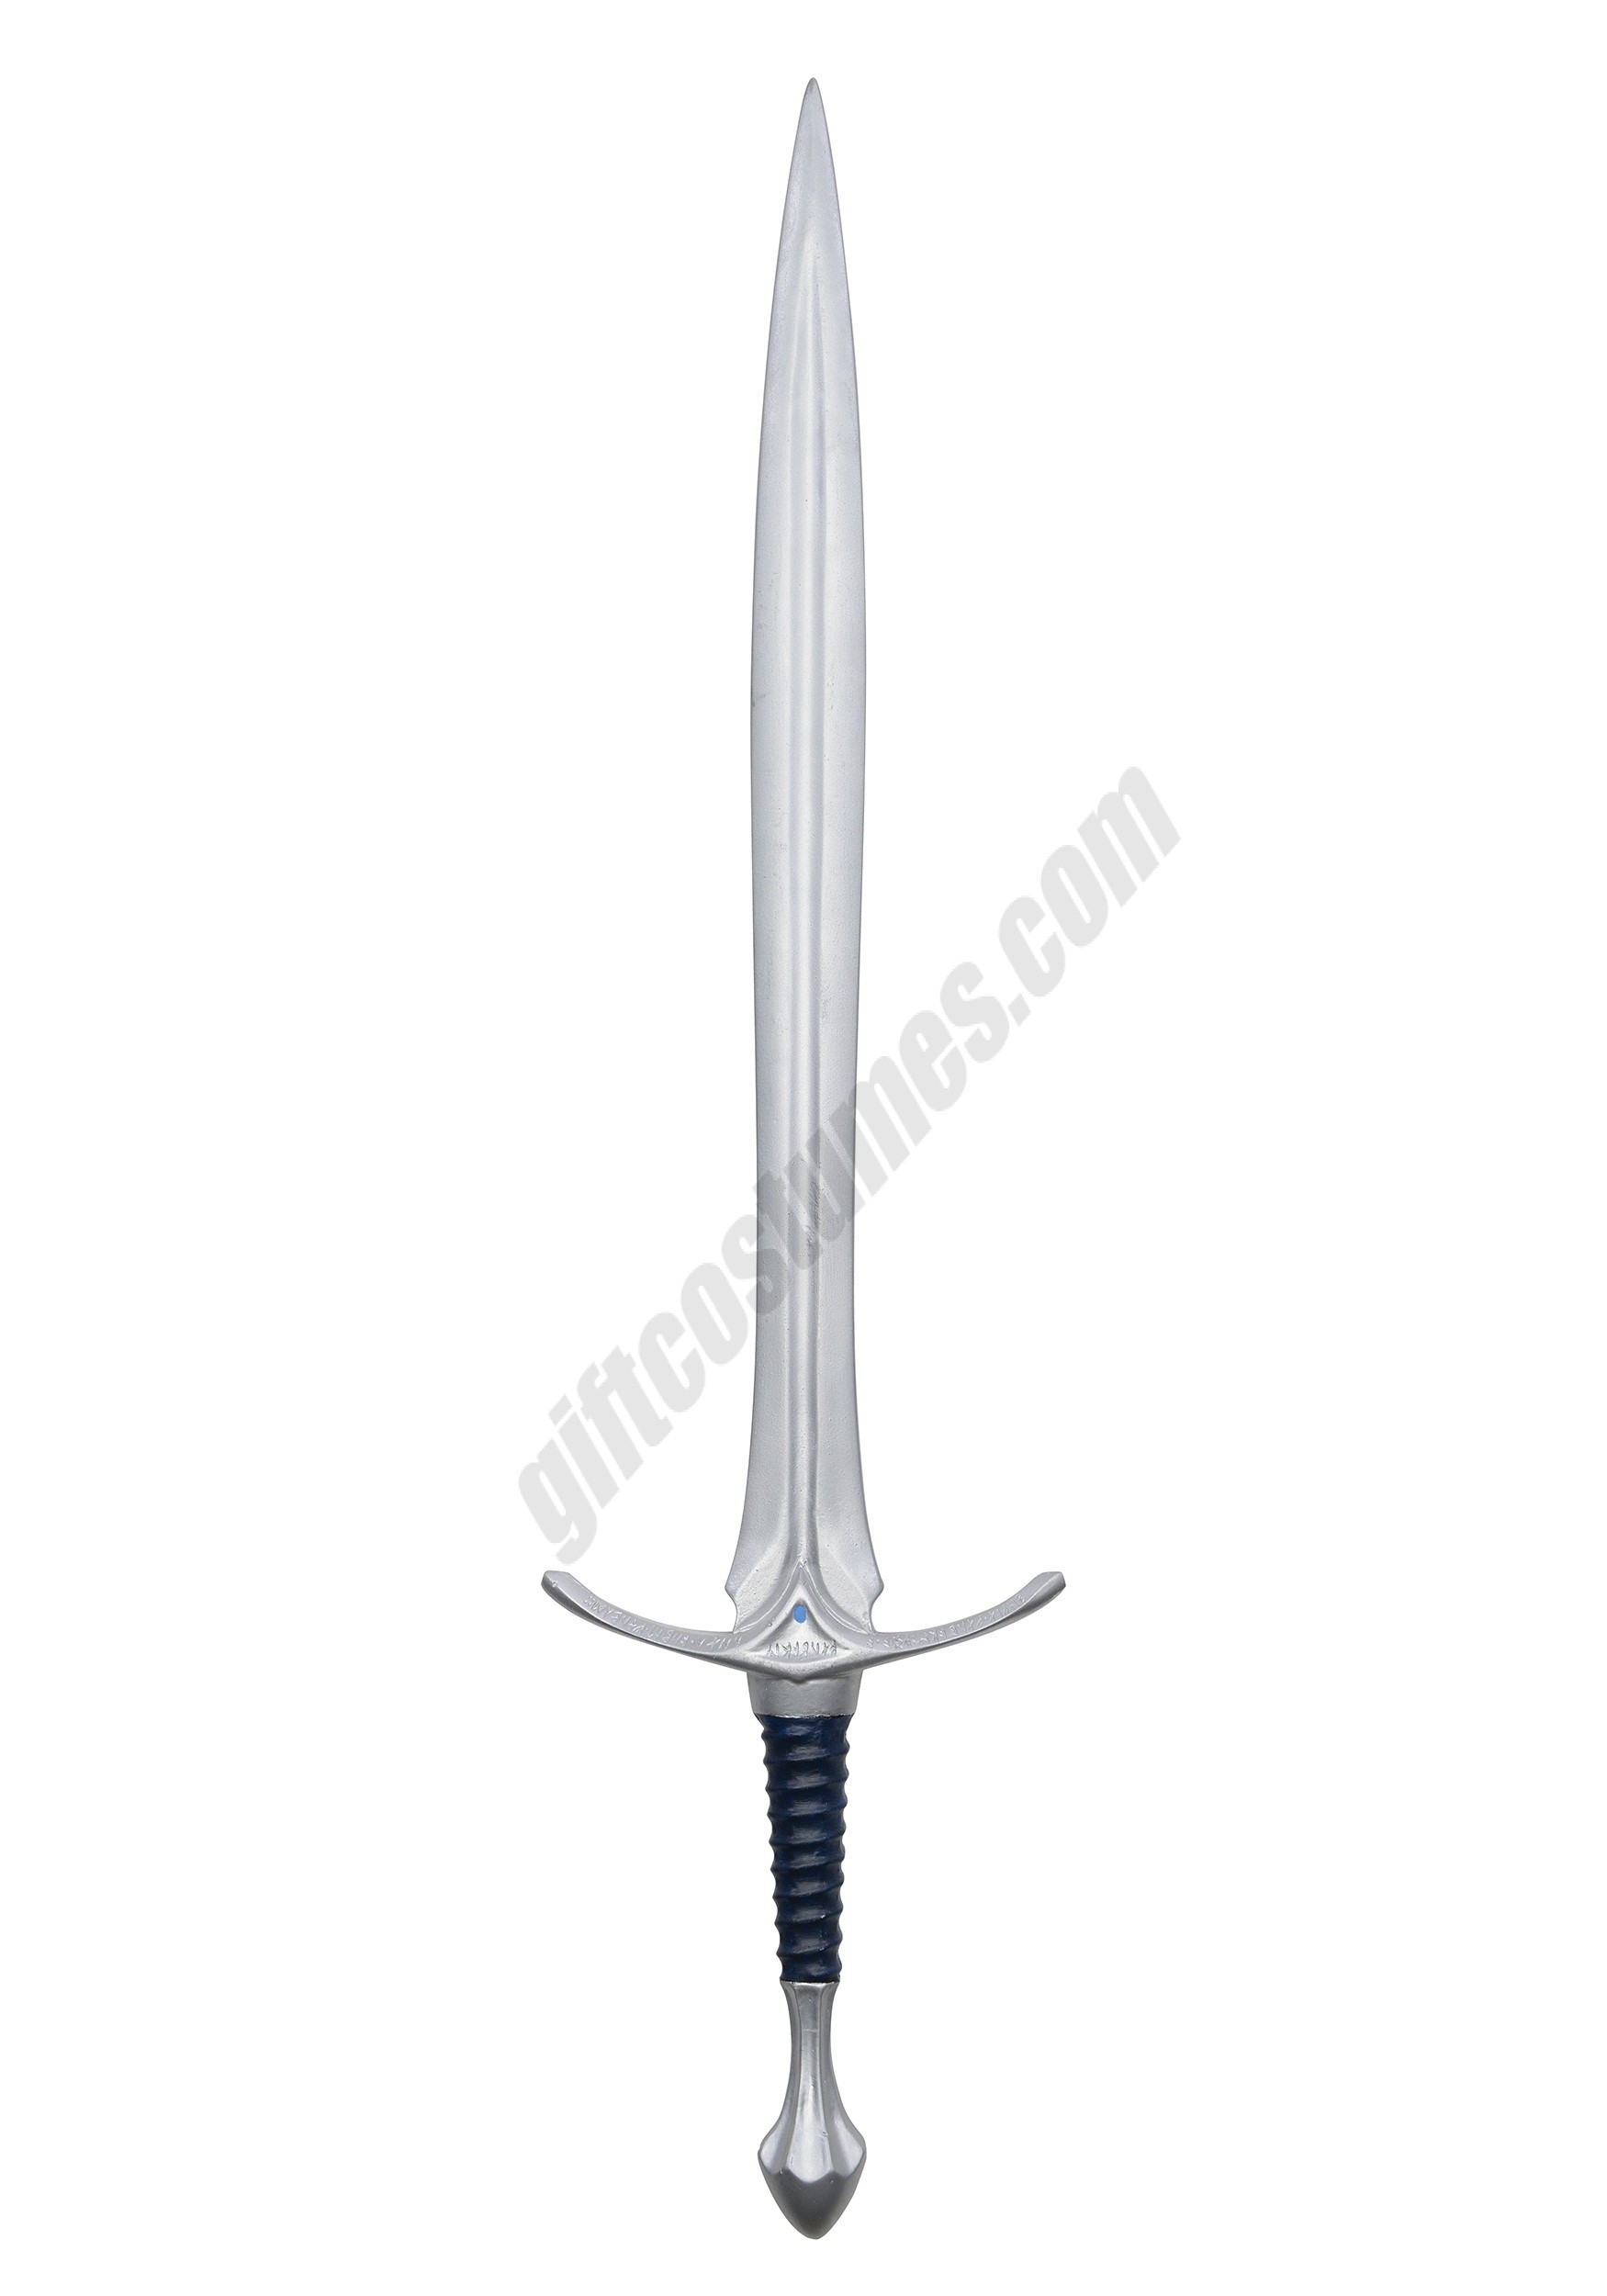 Lord of the Rings Gandalf Sword Promotions - Lord of the Rings Gandalf Sword Promotions